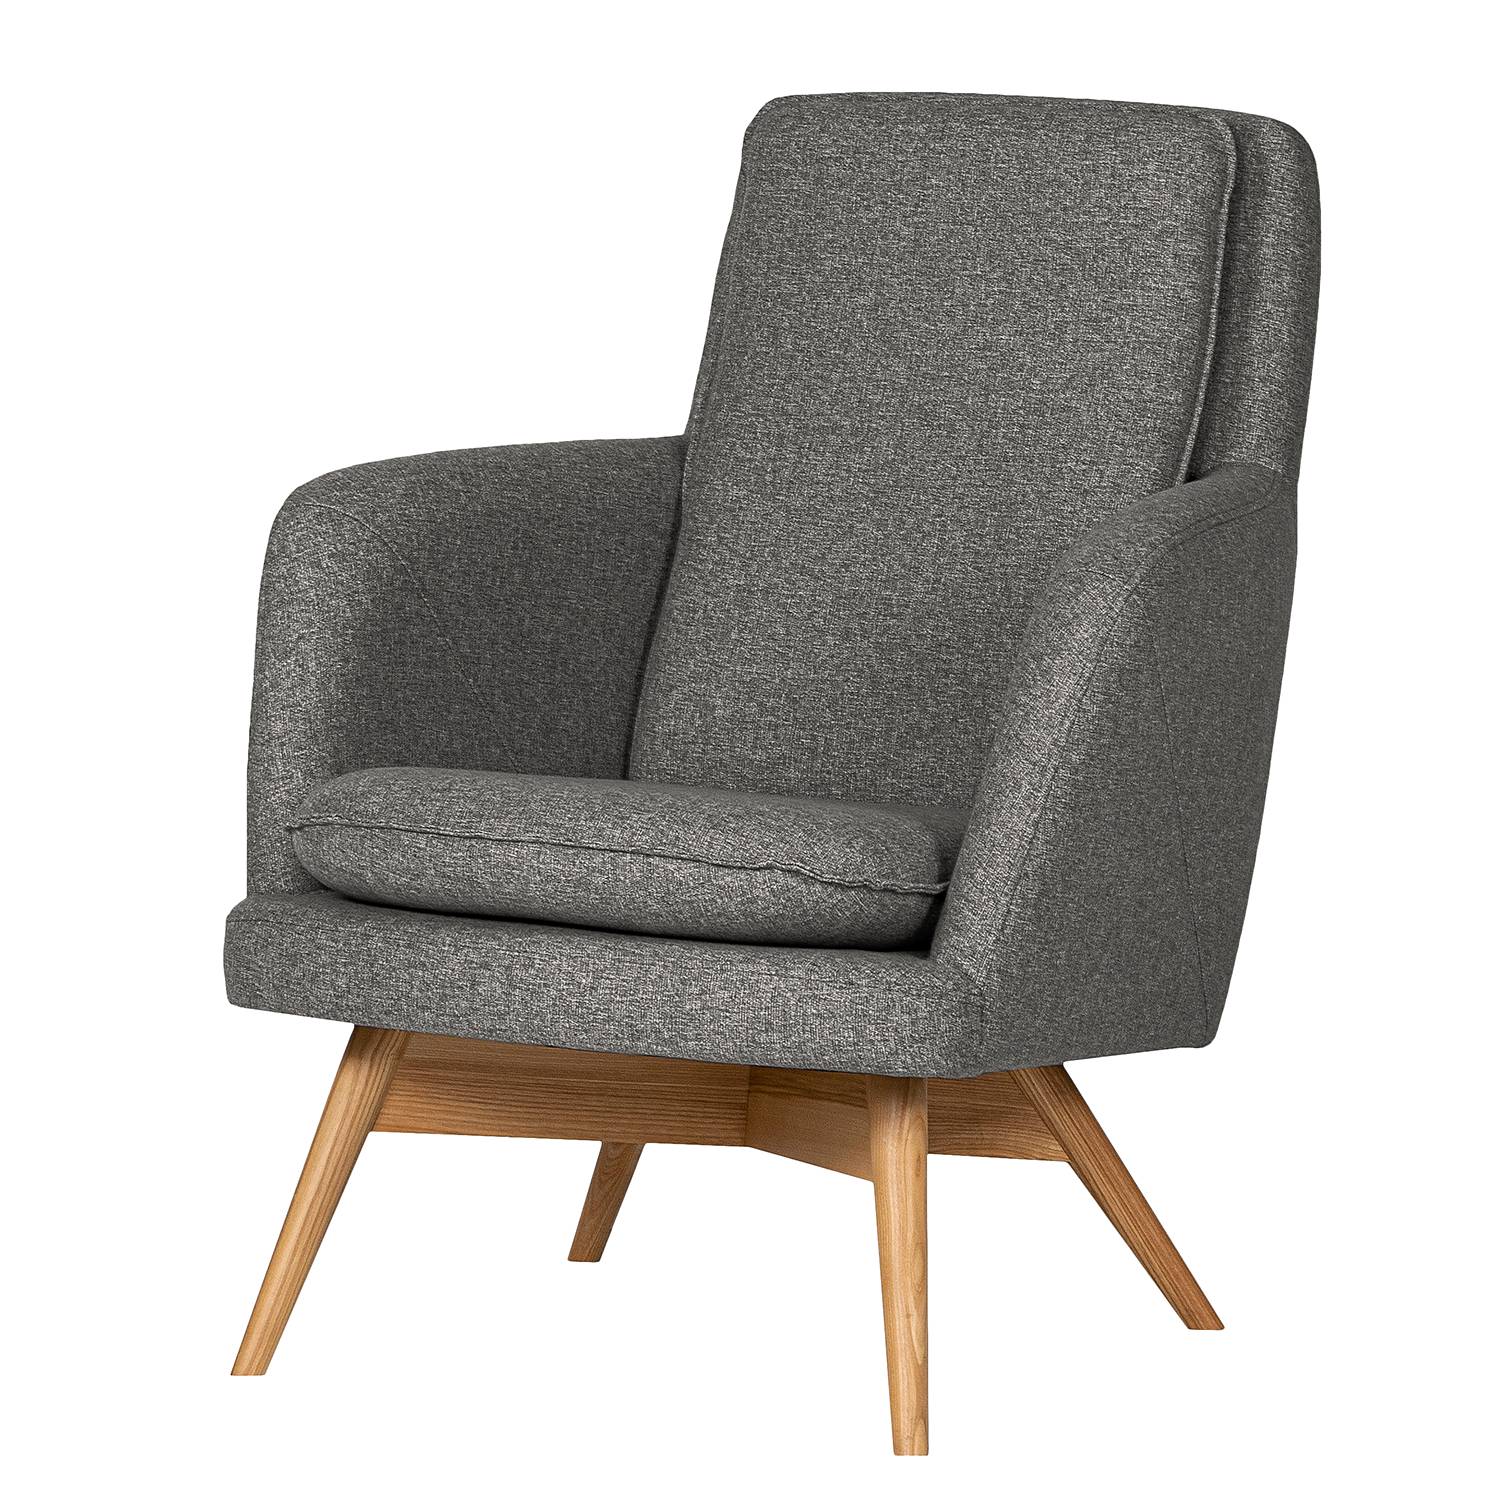 Fauteuil Farnay